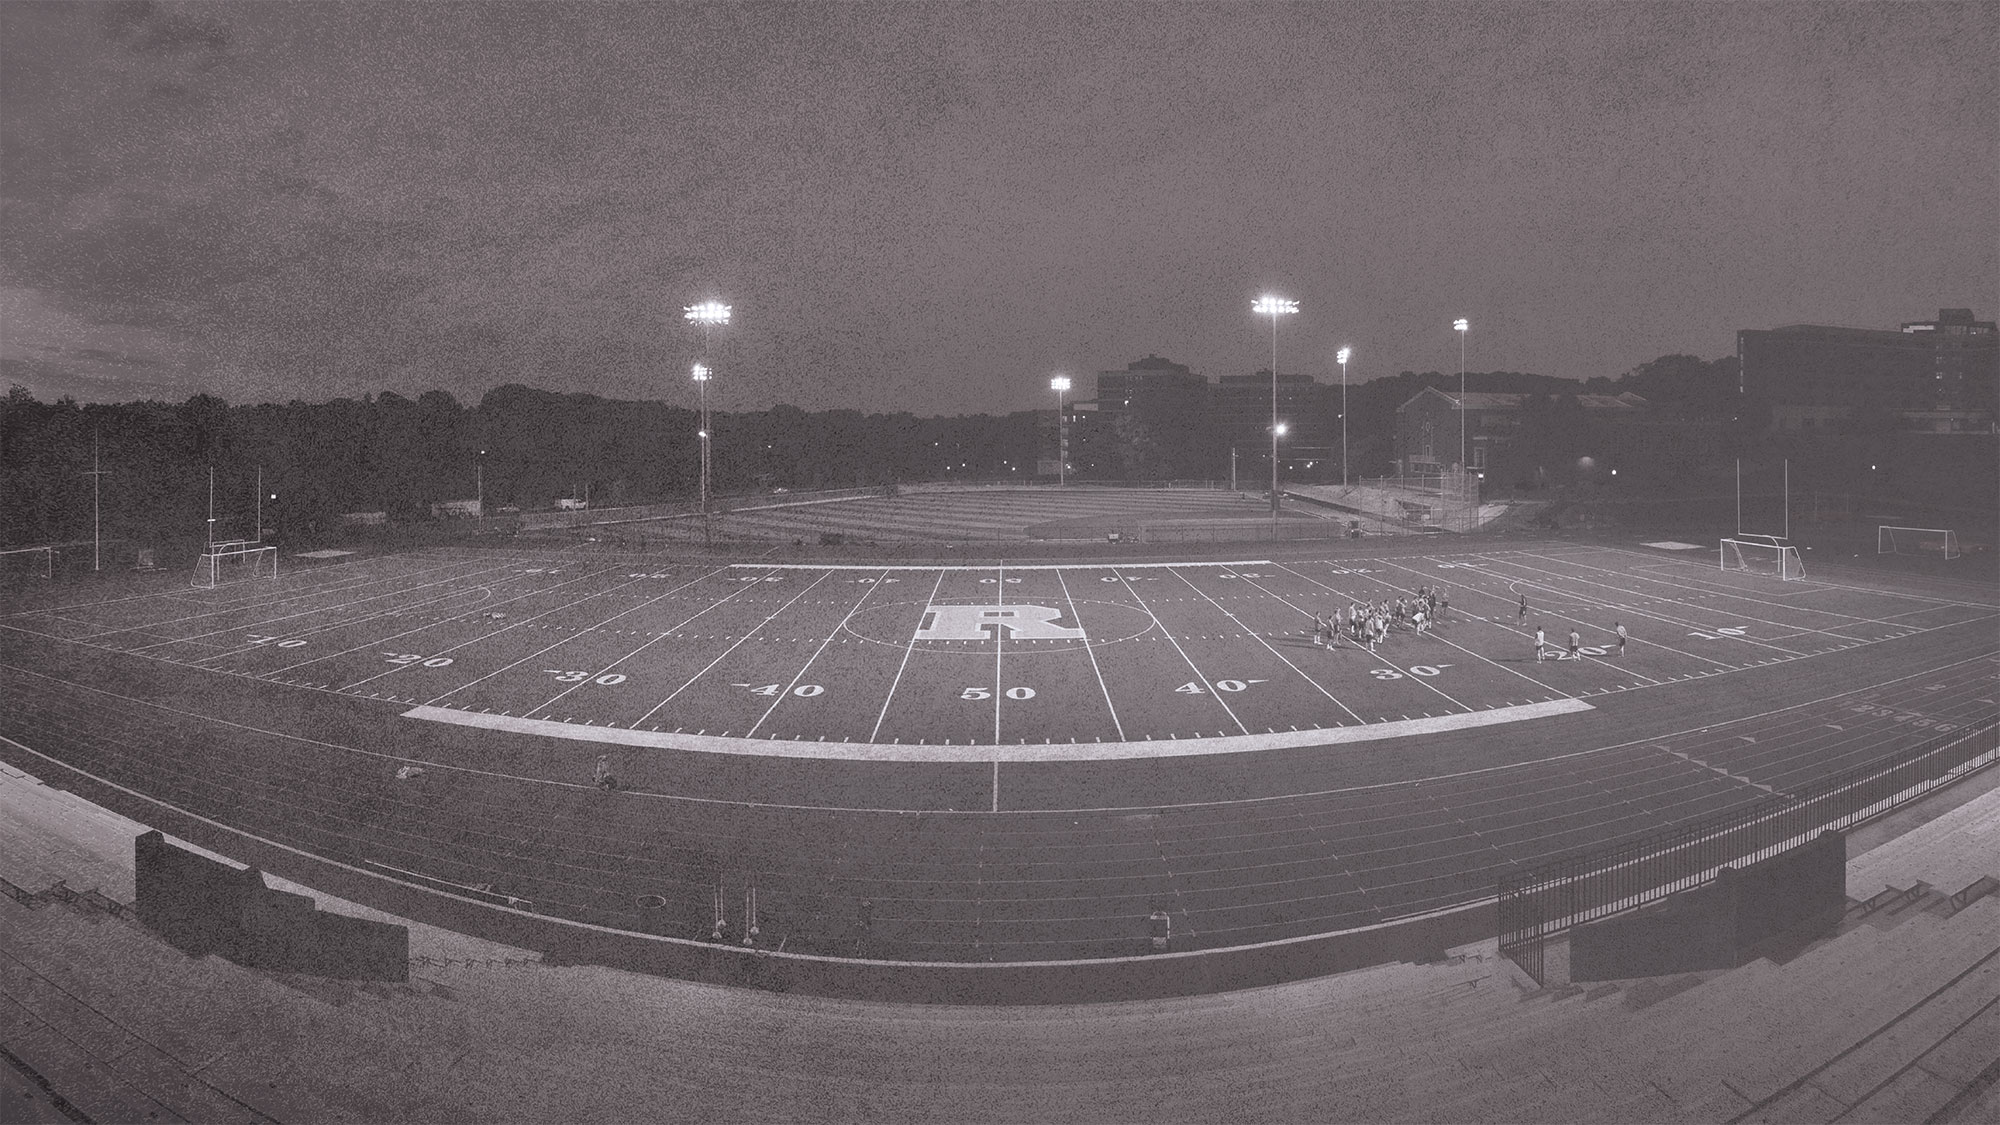 black and white photo of athletic field with the Rochester R at 50 yard line